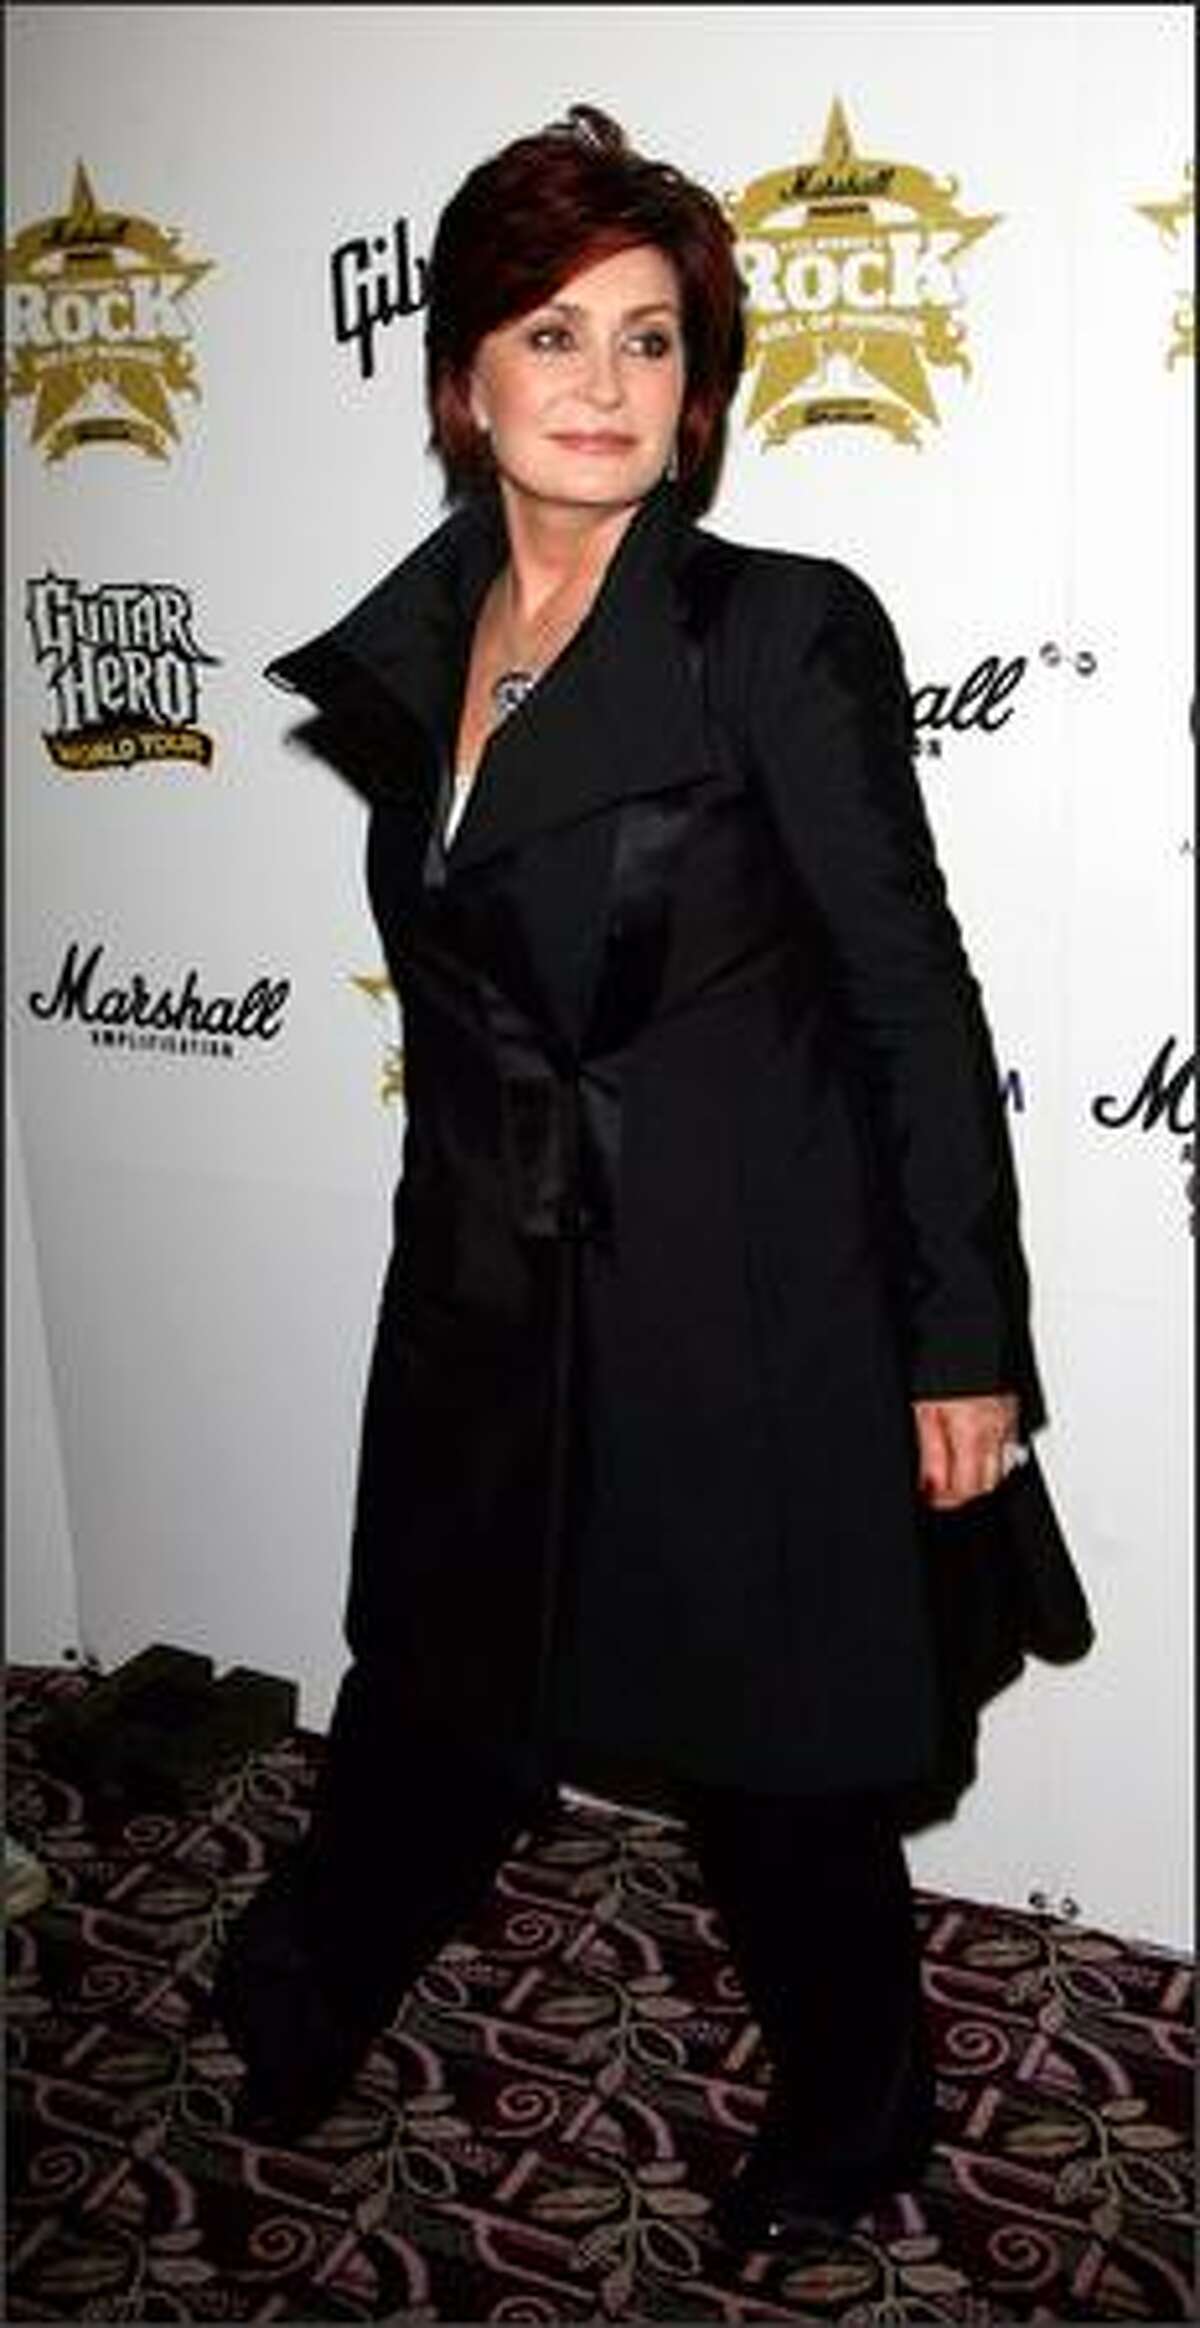 Sharon Osbourne arrives for the Classic Rock Roll of Honour at the Park Lane Hotel on Monday in London.